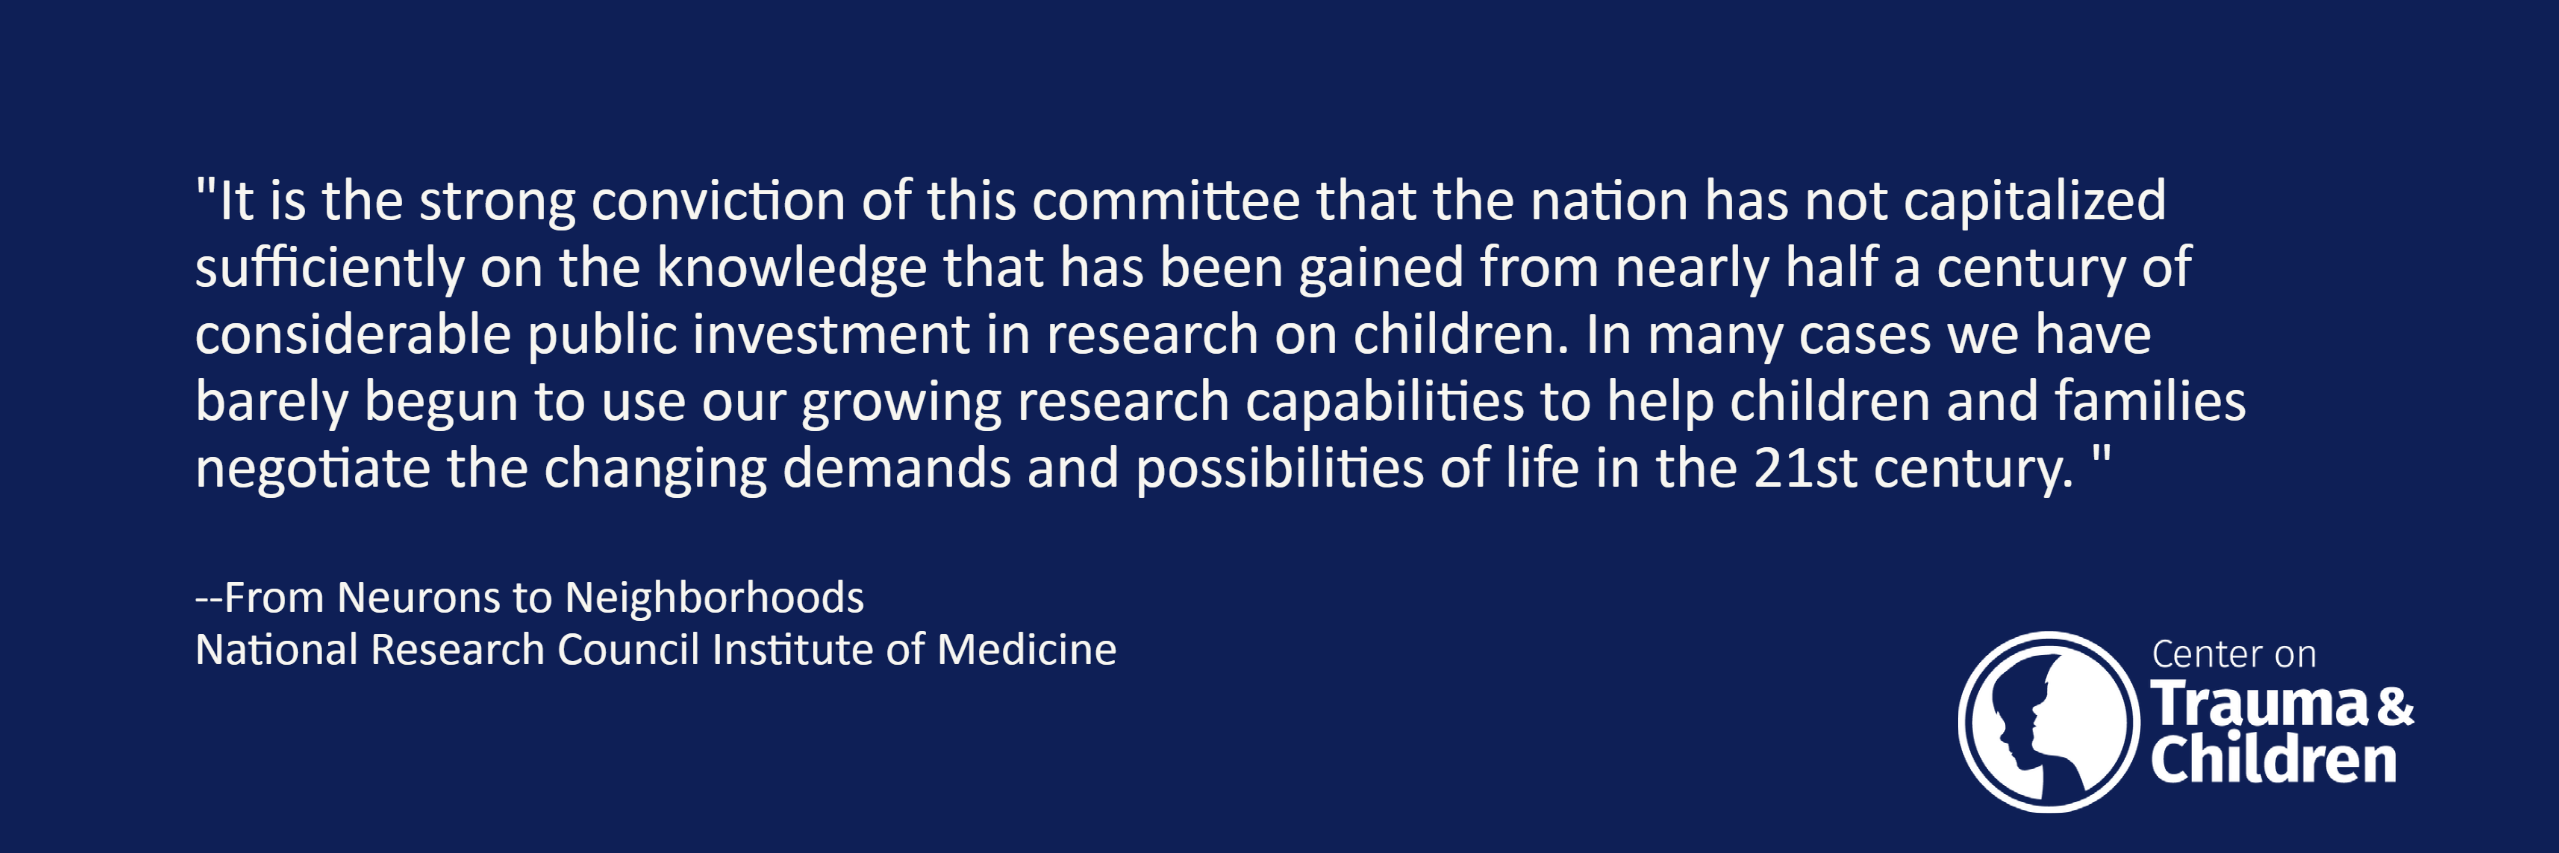 "It is the strong conviction of this committee that the nation has not capitalized sufficiently on the knowledge that has been gained from nearly half a century of considerable public investment in research on children. In many cases we have barely begun to use our growing research capabilities to help children and families negotiate the changing demands and possibilities of life in the 21st century. "